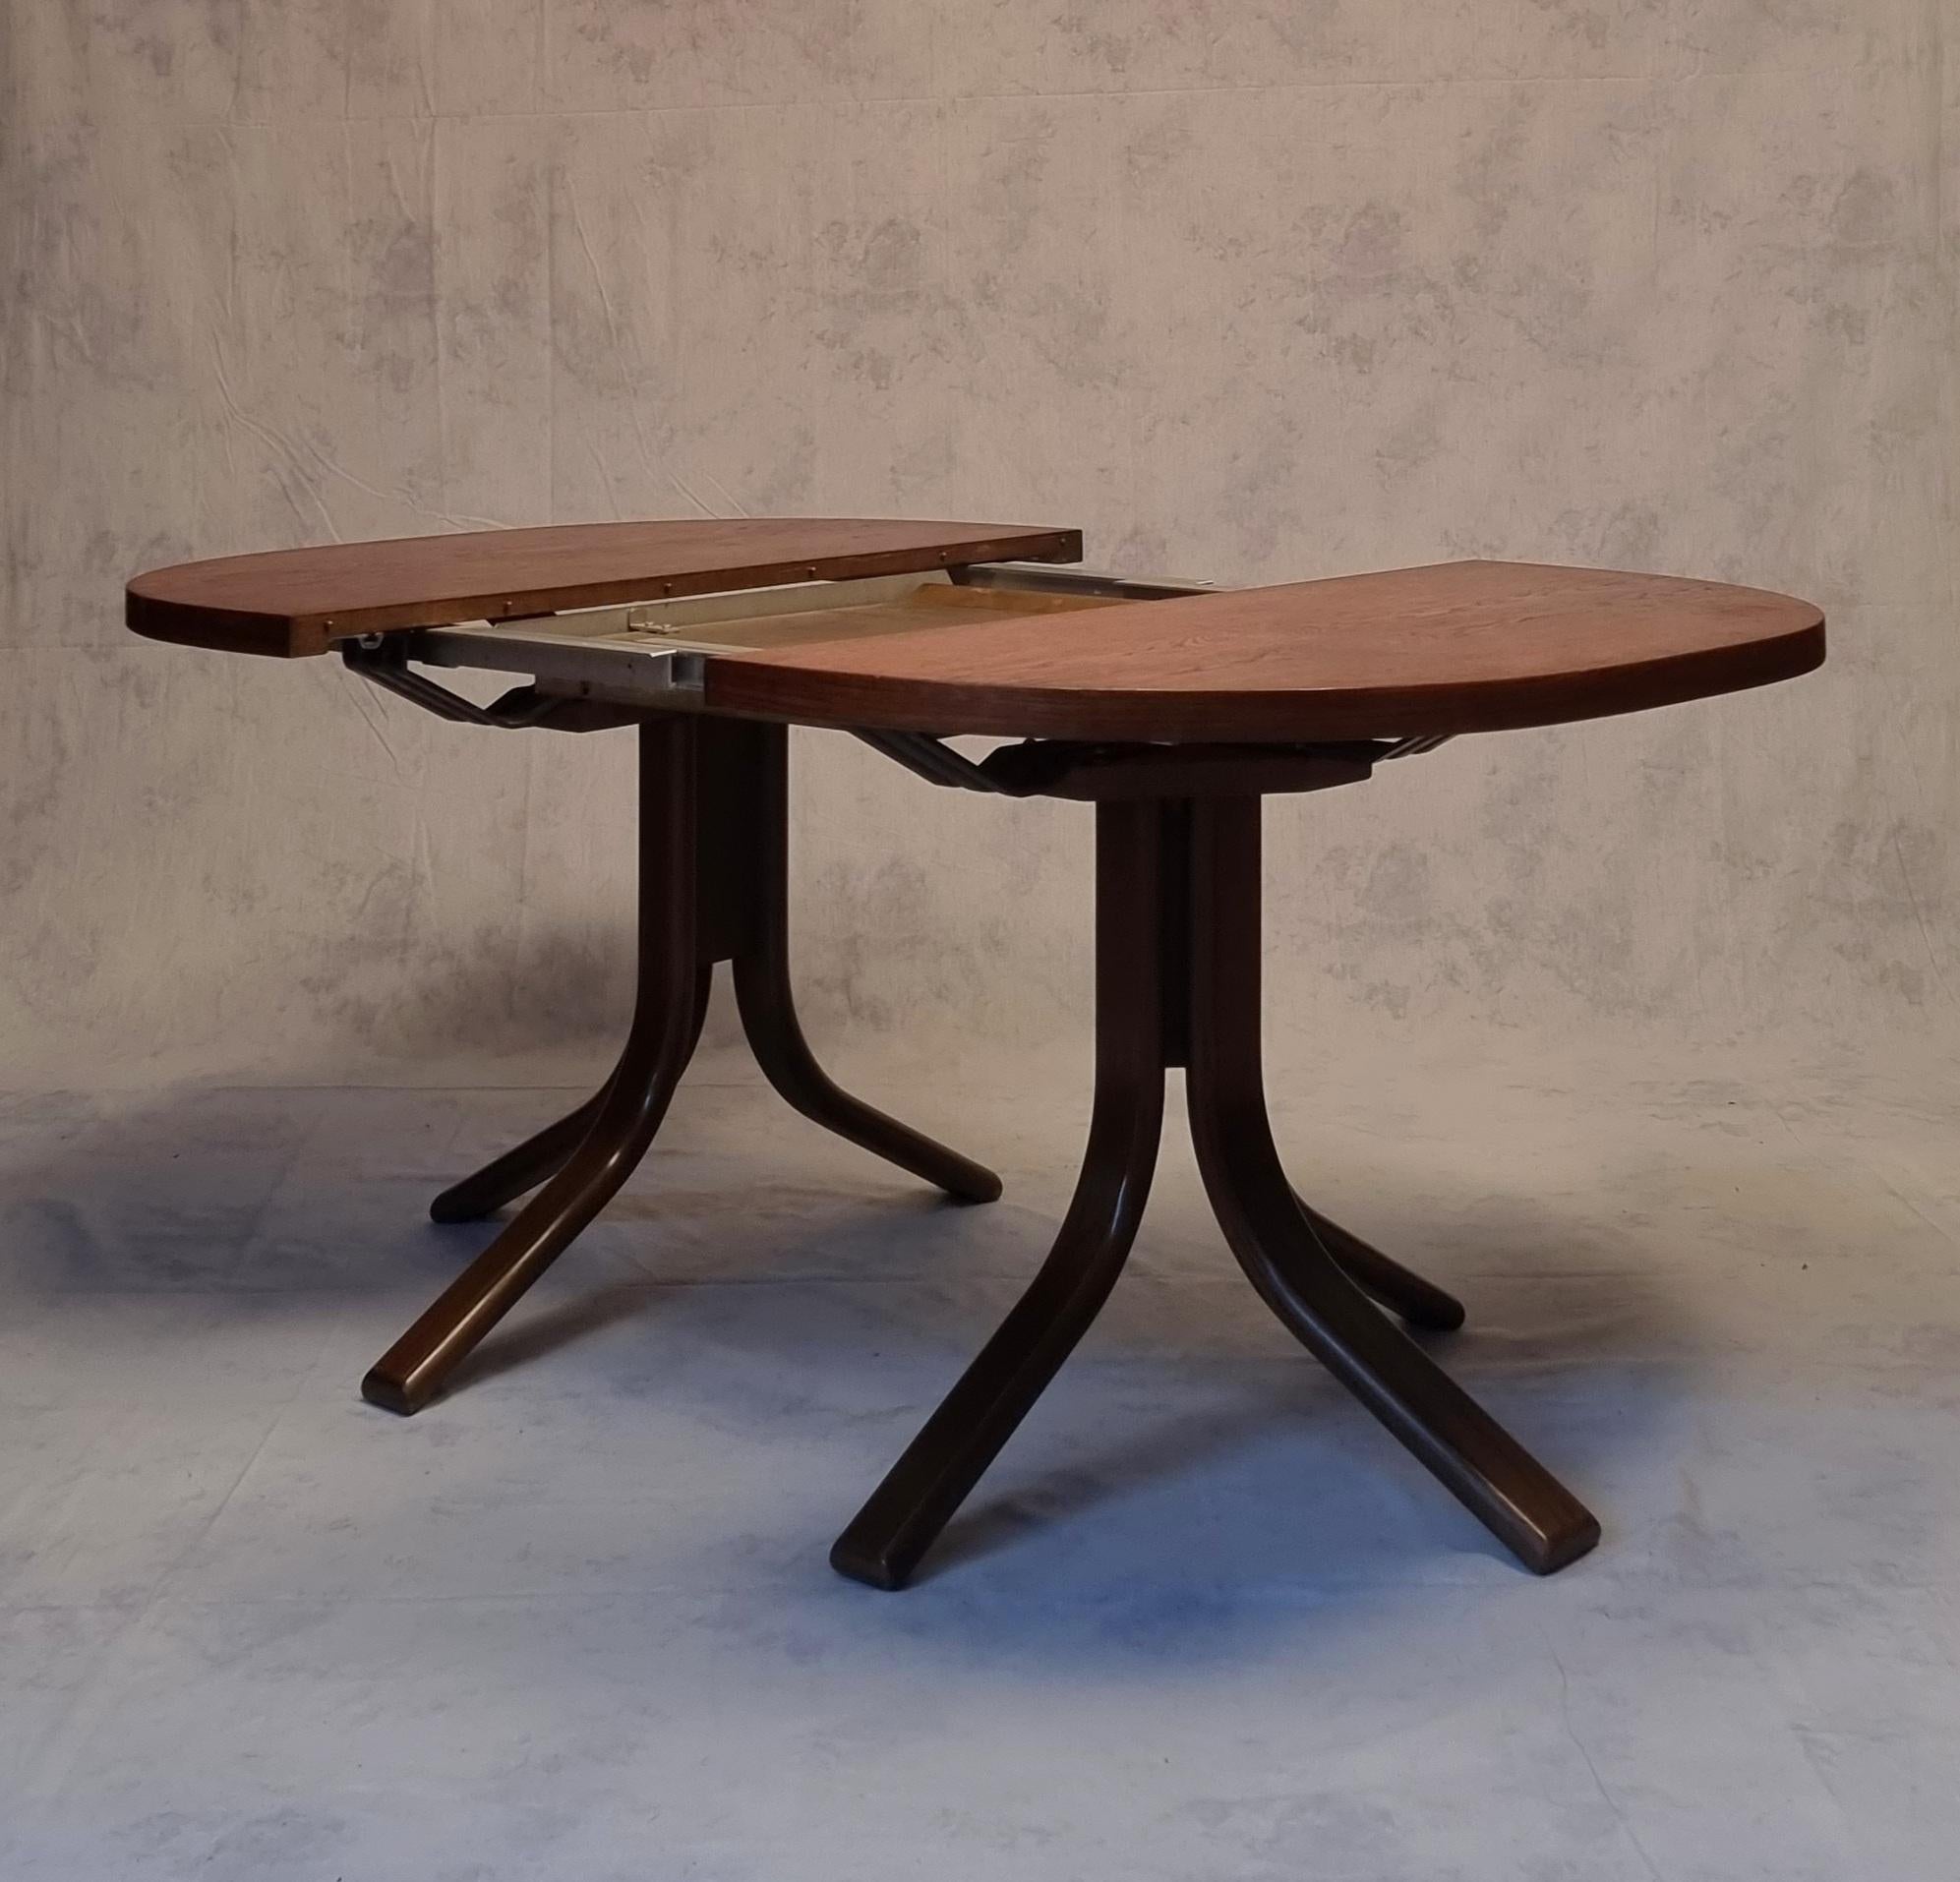 Superb and rare dining room table by the well-known Swiss designer Bruno Rey. This table is edited by its historical editor Dietiker and is manufactured by the Swiss workshop Stuhl aus Stein am Rhein. It is entirely in solid oak, base as tray. She